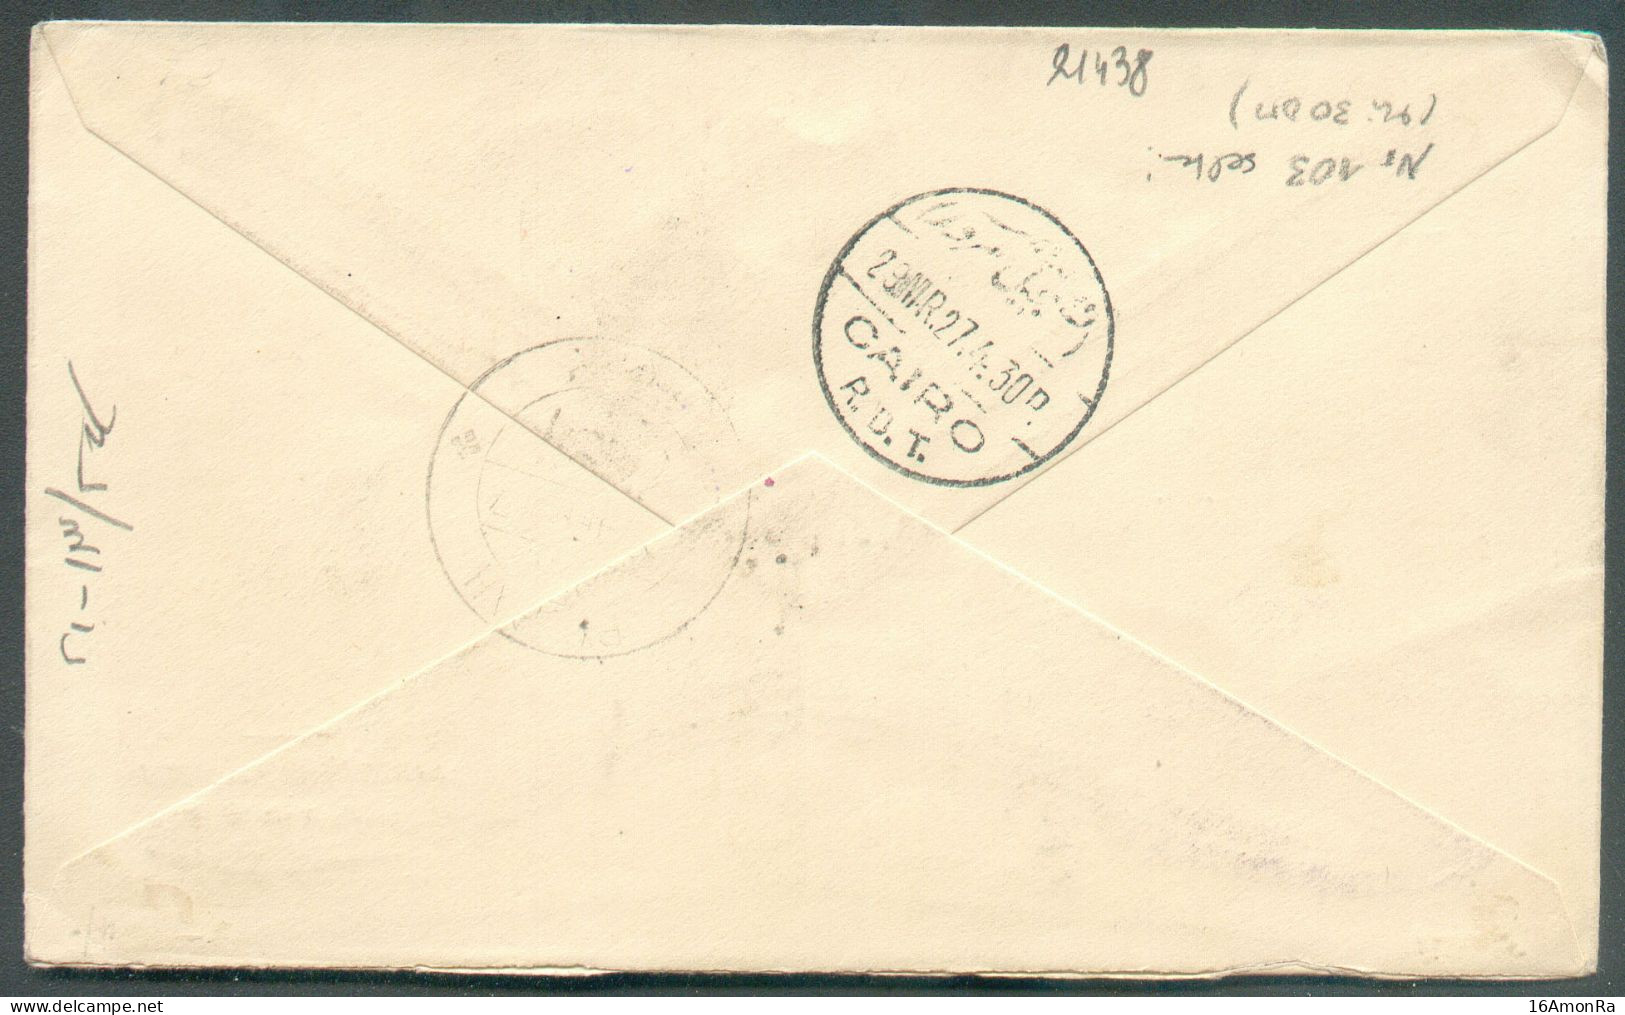 27pi PA. + Issue CONGRES INTERNATIONAL DU COTON 1927 Cacn. ALEXANDRIA On Regisetred Cover + Air Mail 29 March 1927 To Ba - Posta Aerea